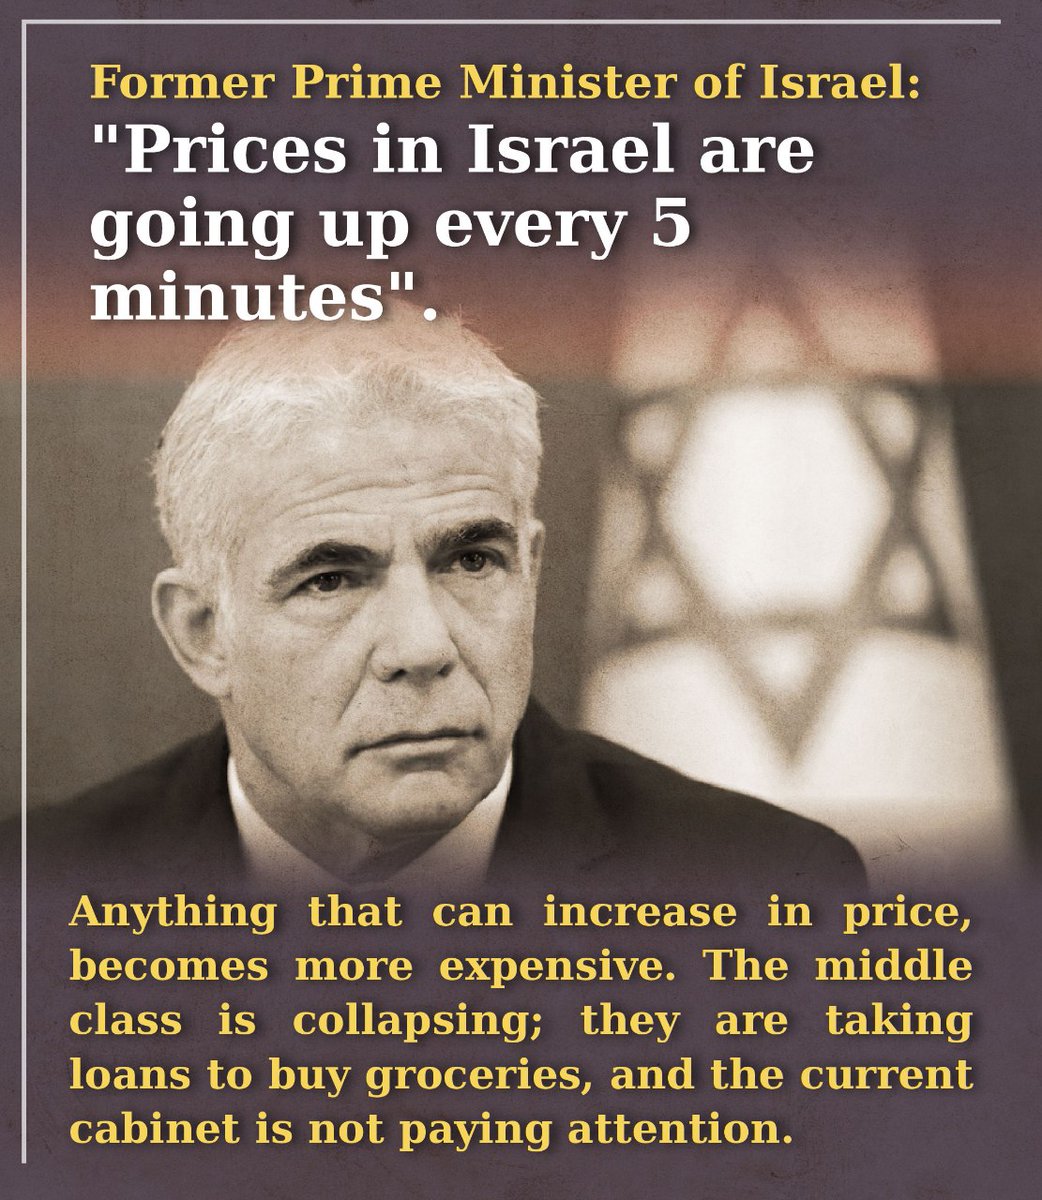 Former Prime Minister of Israel: Prices in Israel go up every 5 minutes Everything that has the ability to increase in price becomes more expensive. The middle class is collapsing; They borrow from the supermarket to buy, and the current cabinet does not pay attention.